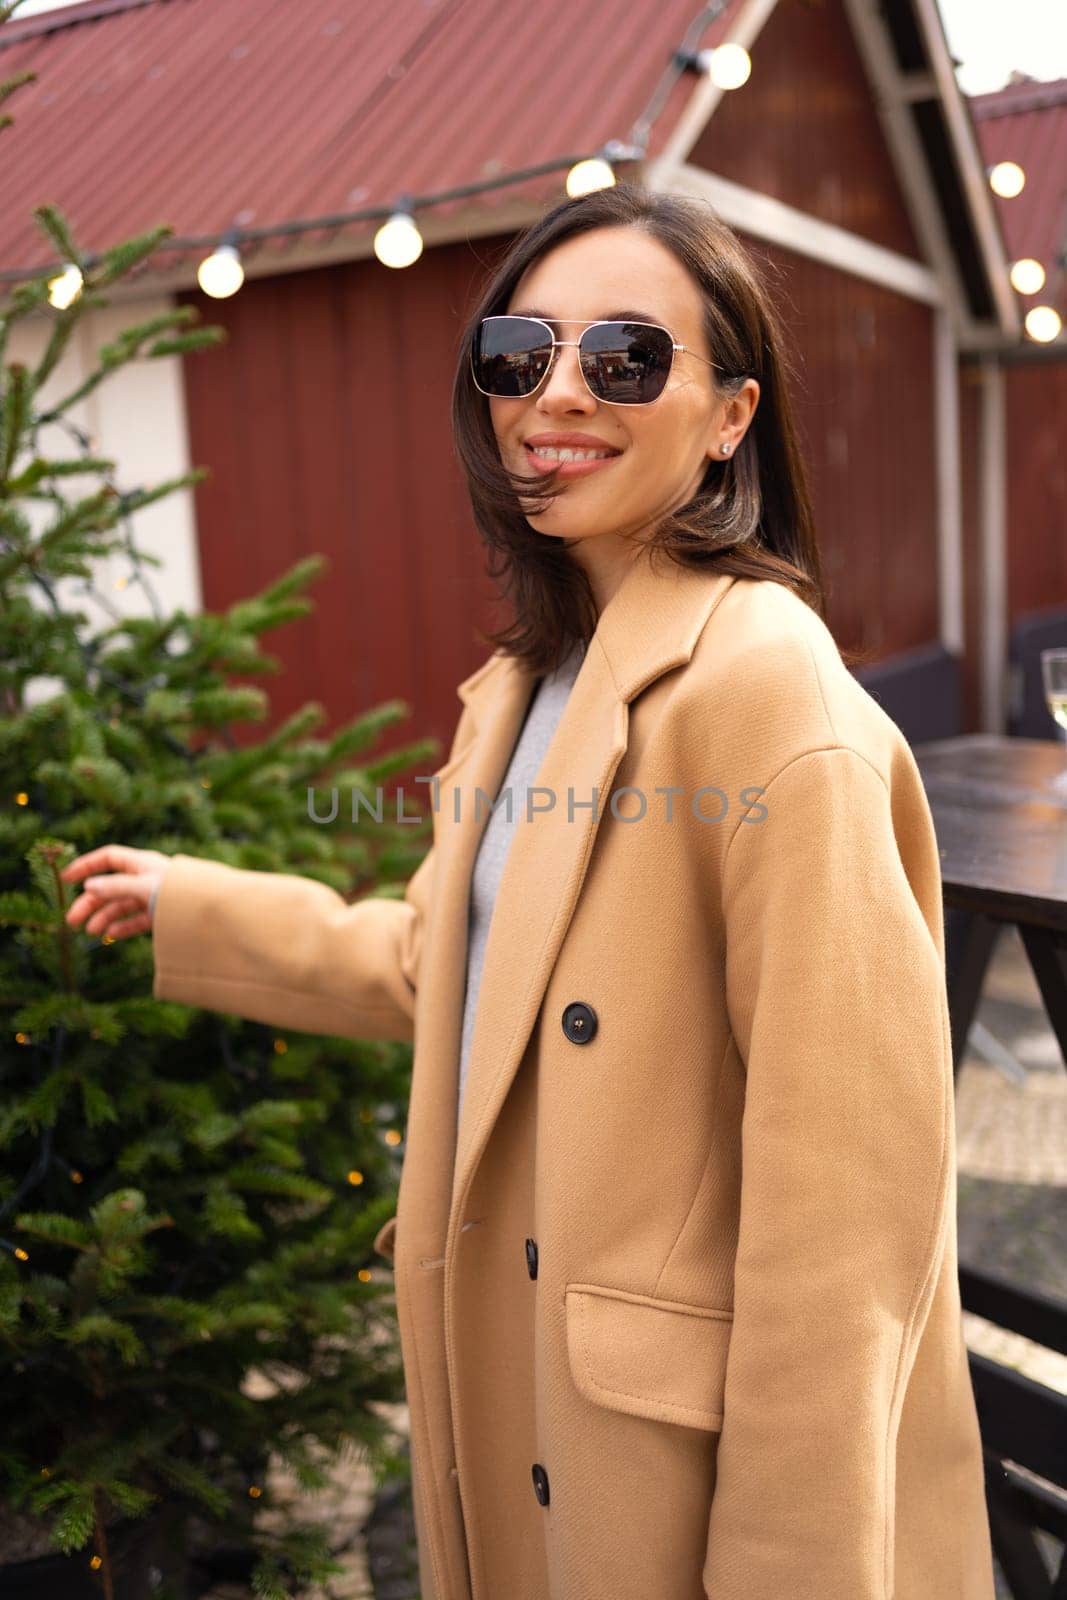 Woman looking for perfect Christmas tree to buy on the tree shop, outdoor in European city. Girl using hand for check the quality. Dressed stylish trench coat and sunglasses